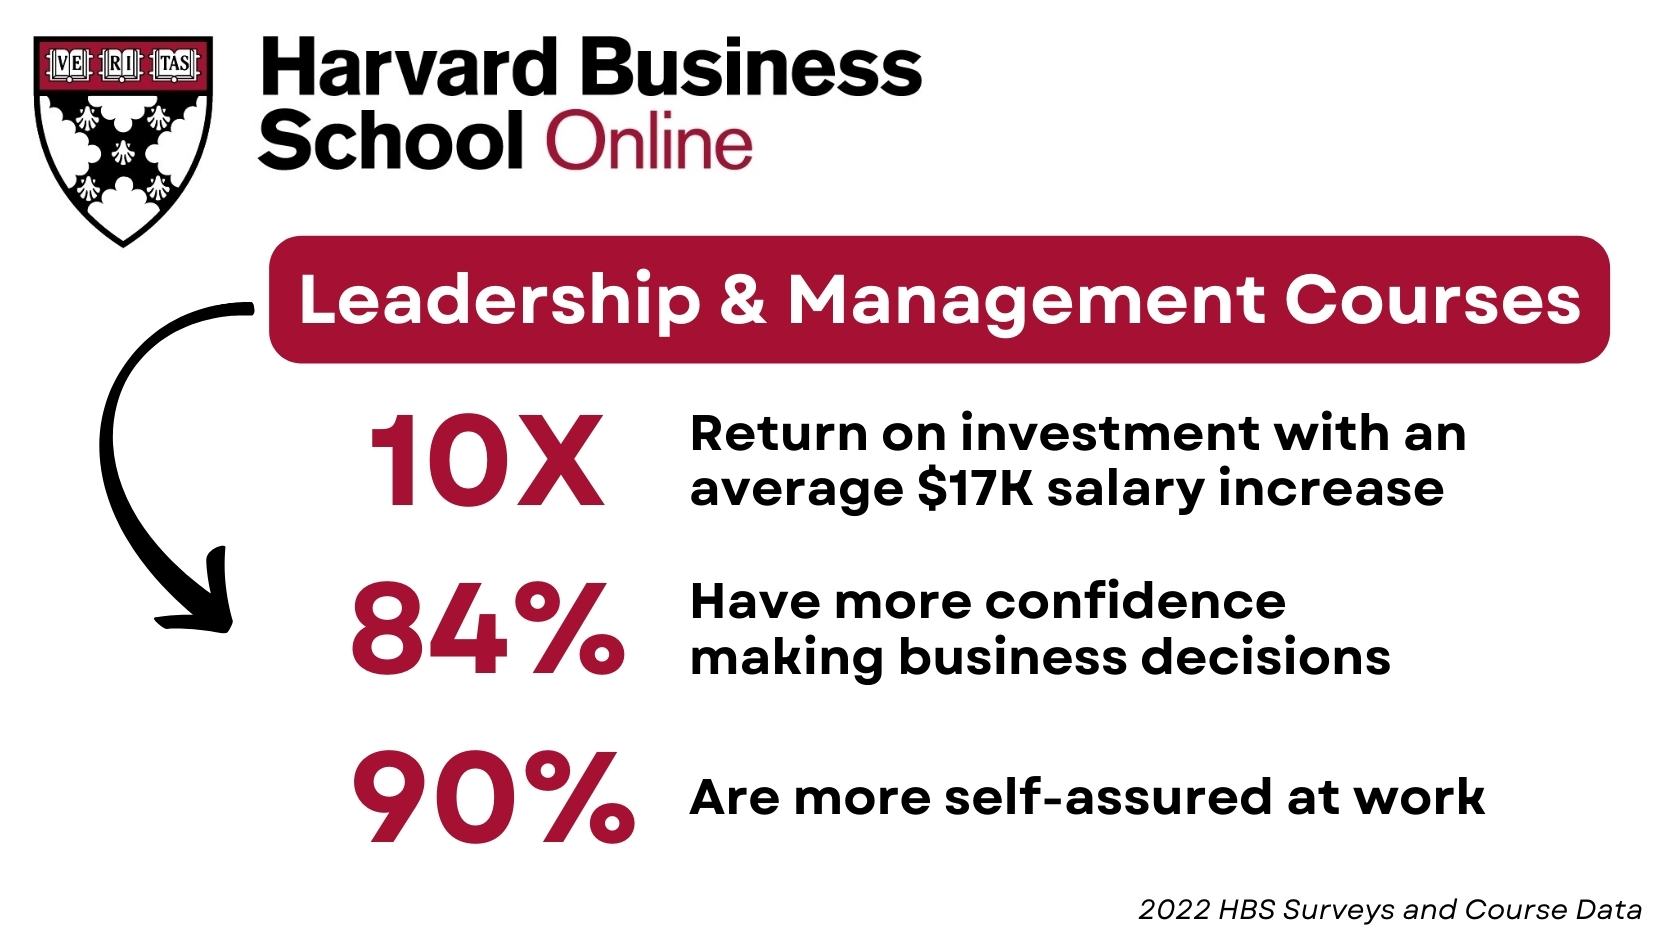 Harvard Business School Online leadership and management courses showing ROI statistics.